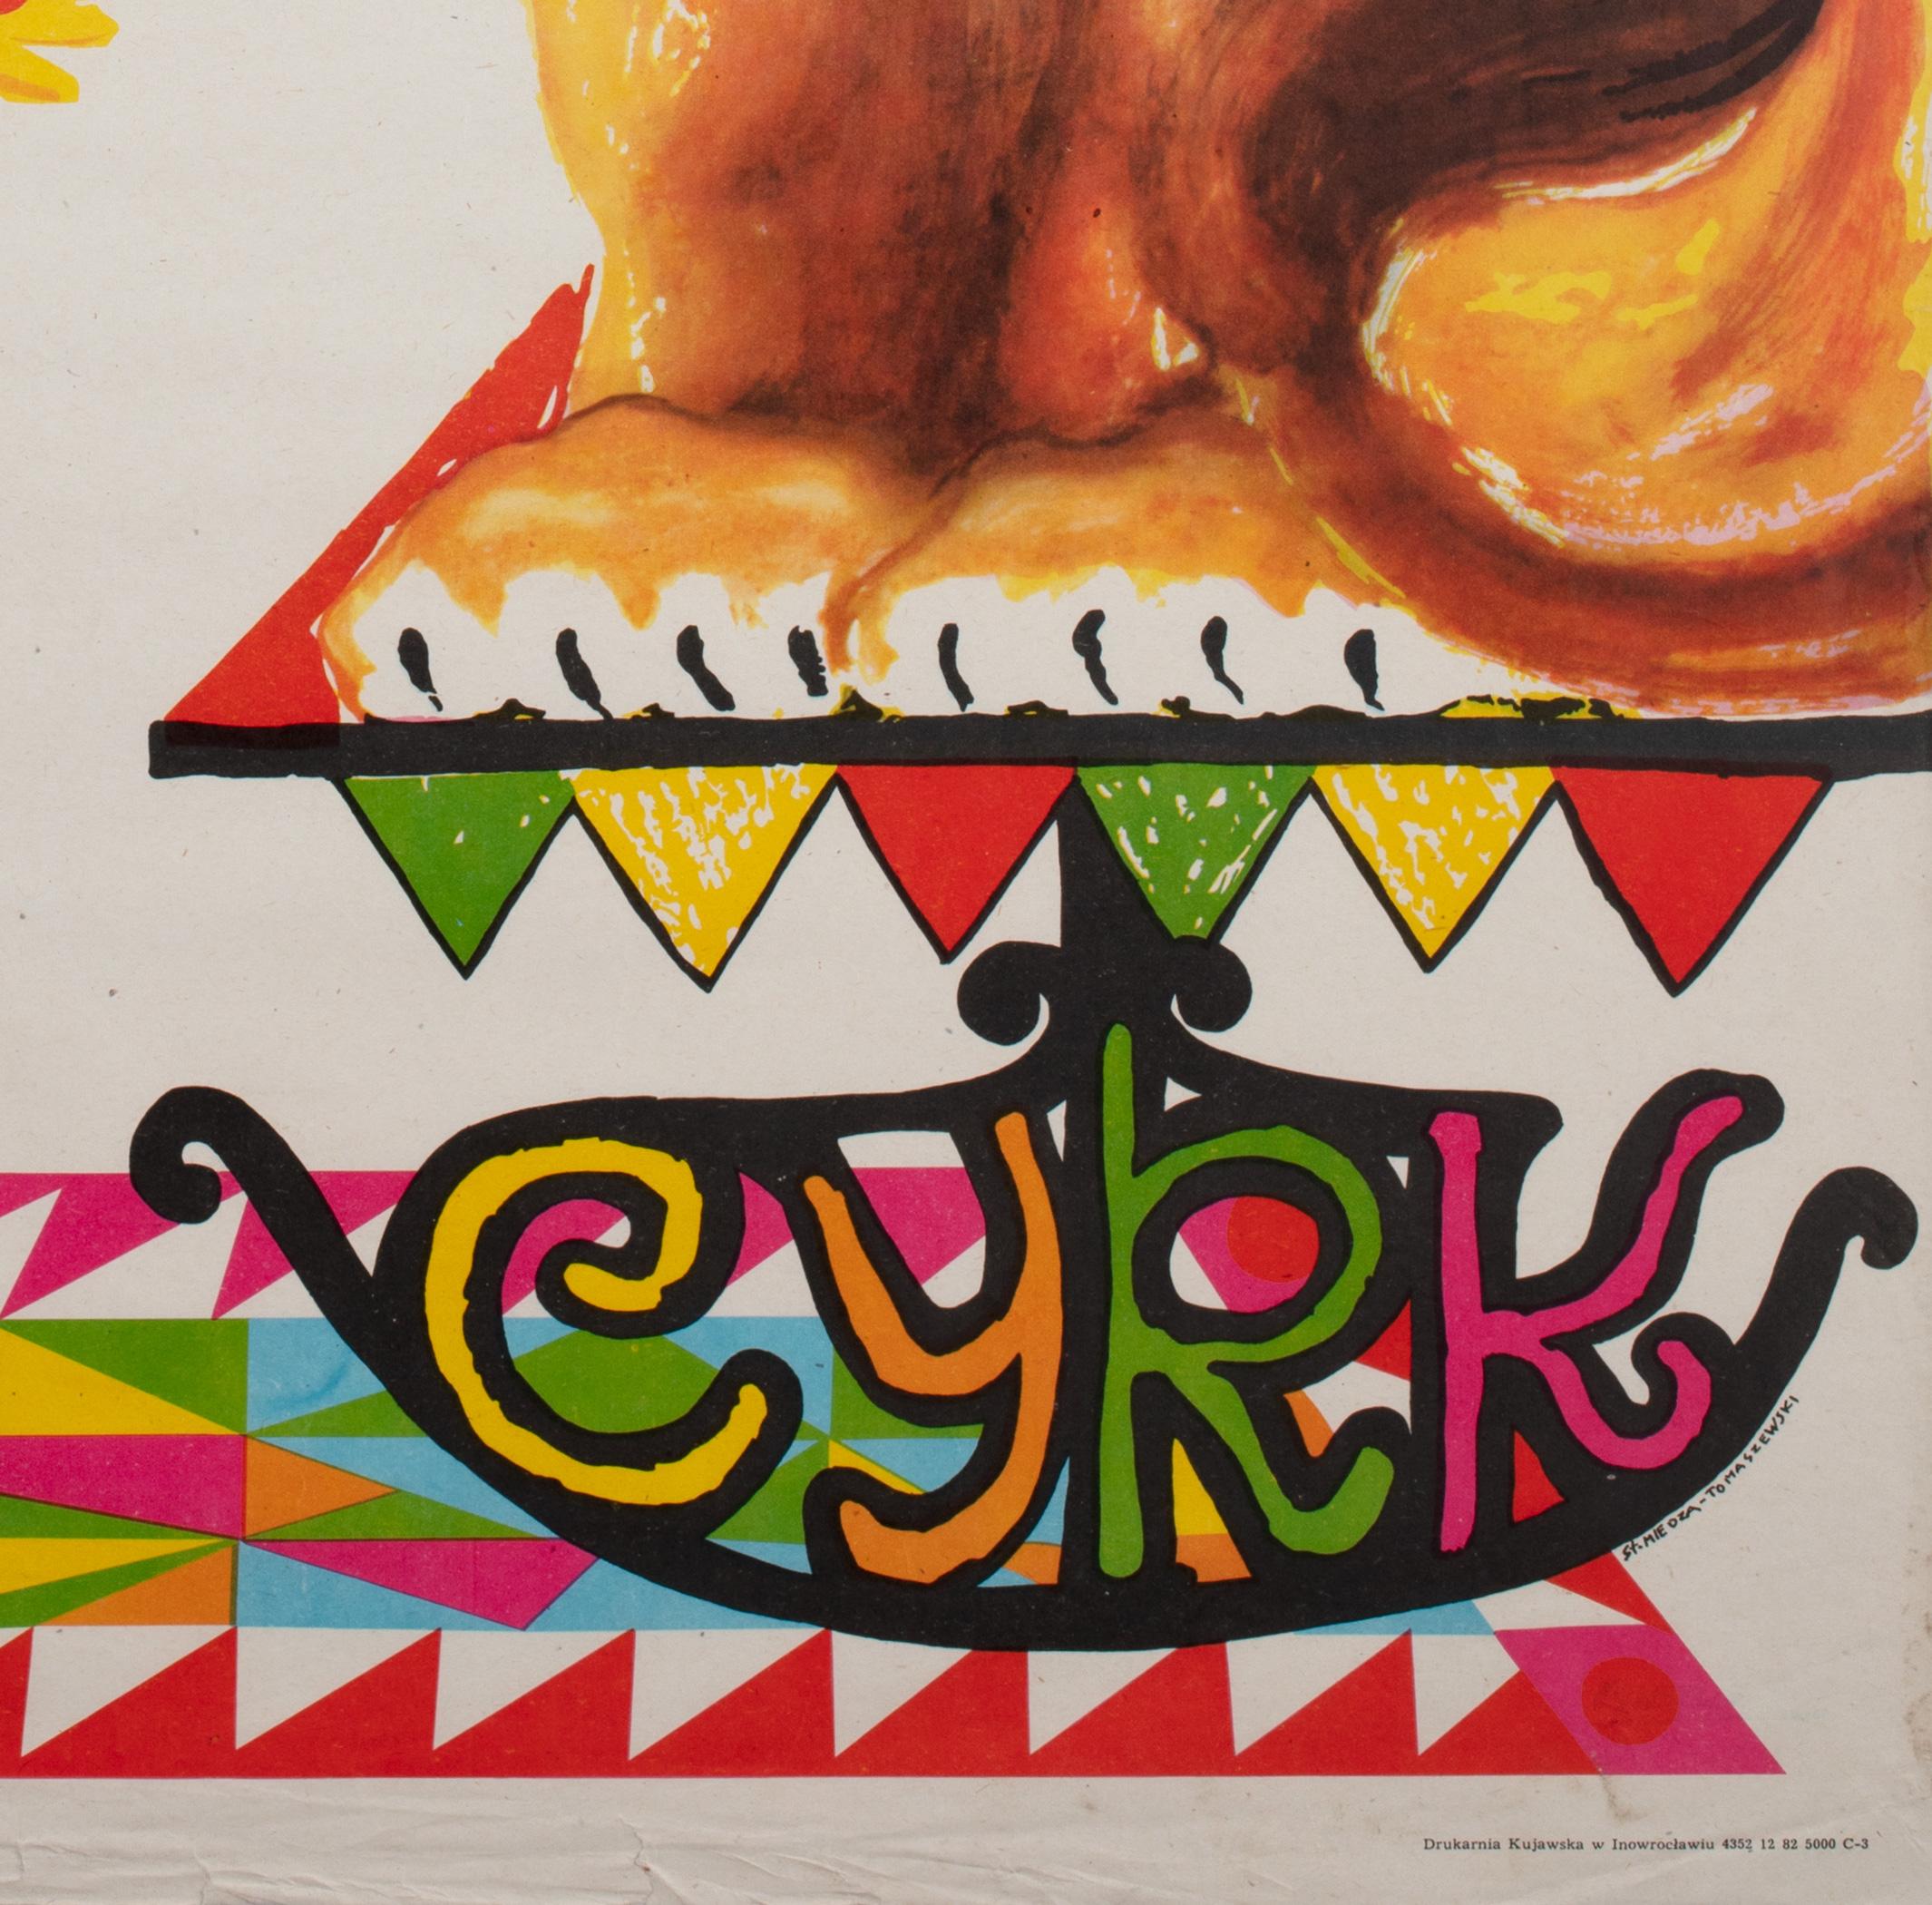 Cyrk Polish Circus Poster Clown and Lion R1982, Miedza-Tomaszewski In Good Condition For Sale In Bath, Somerset